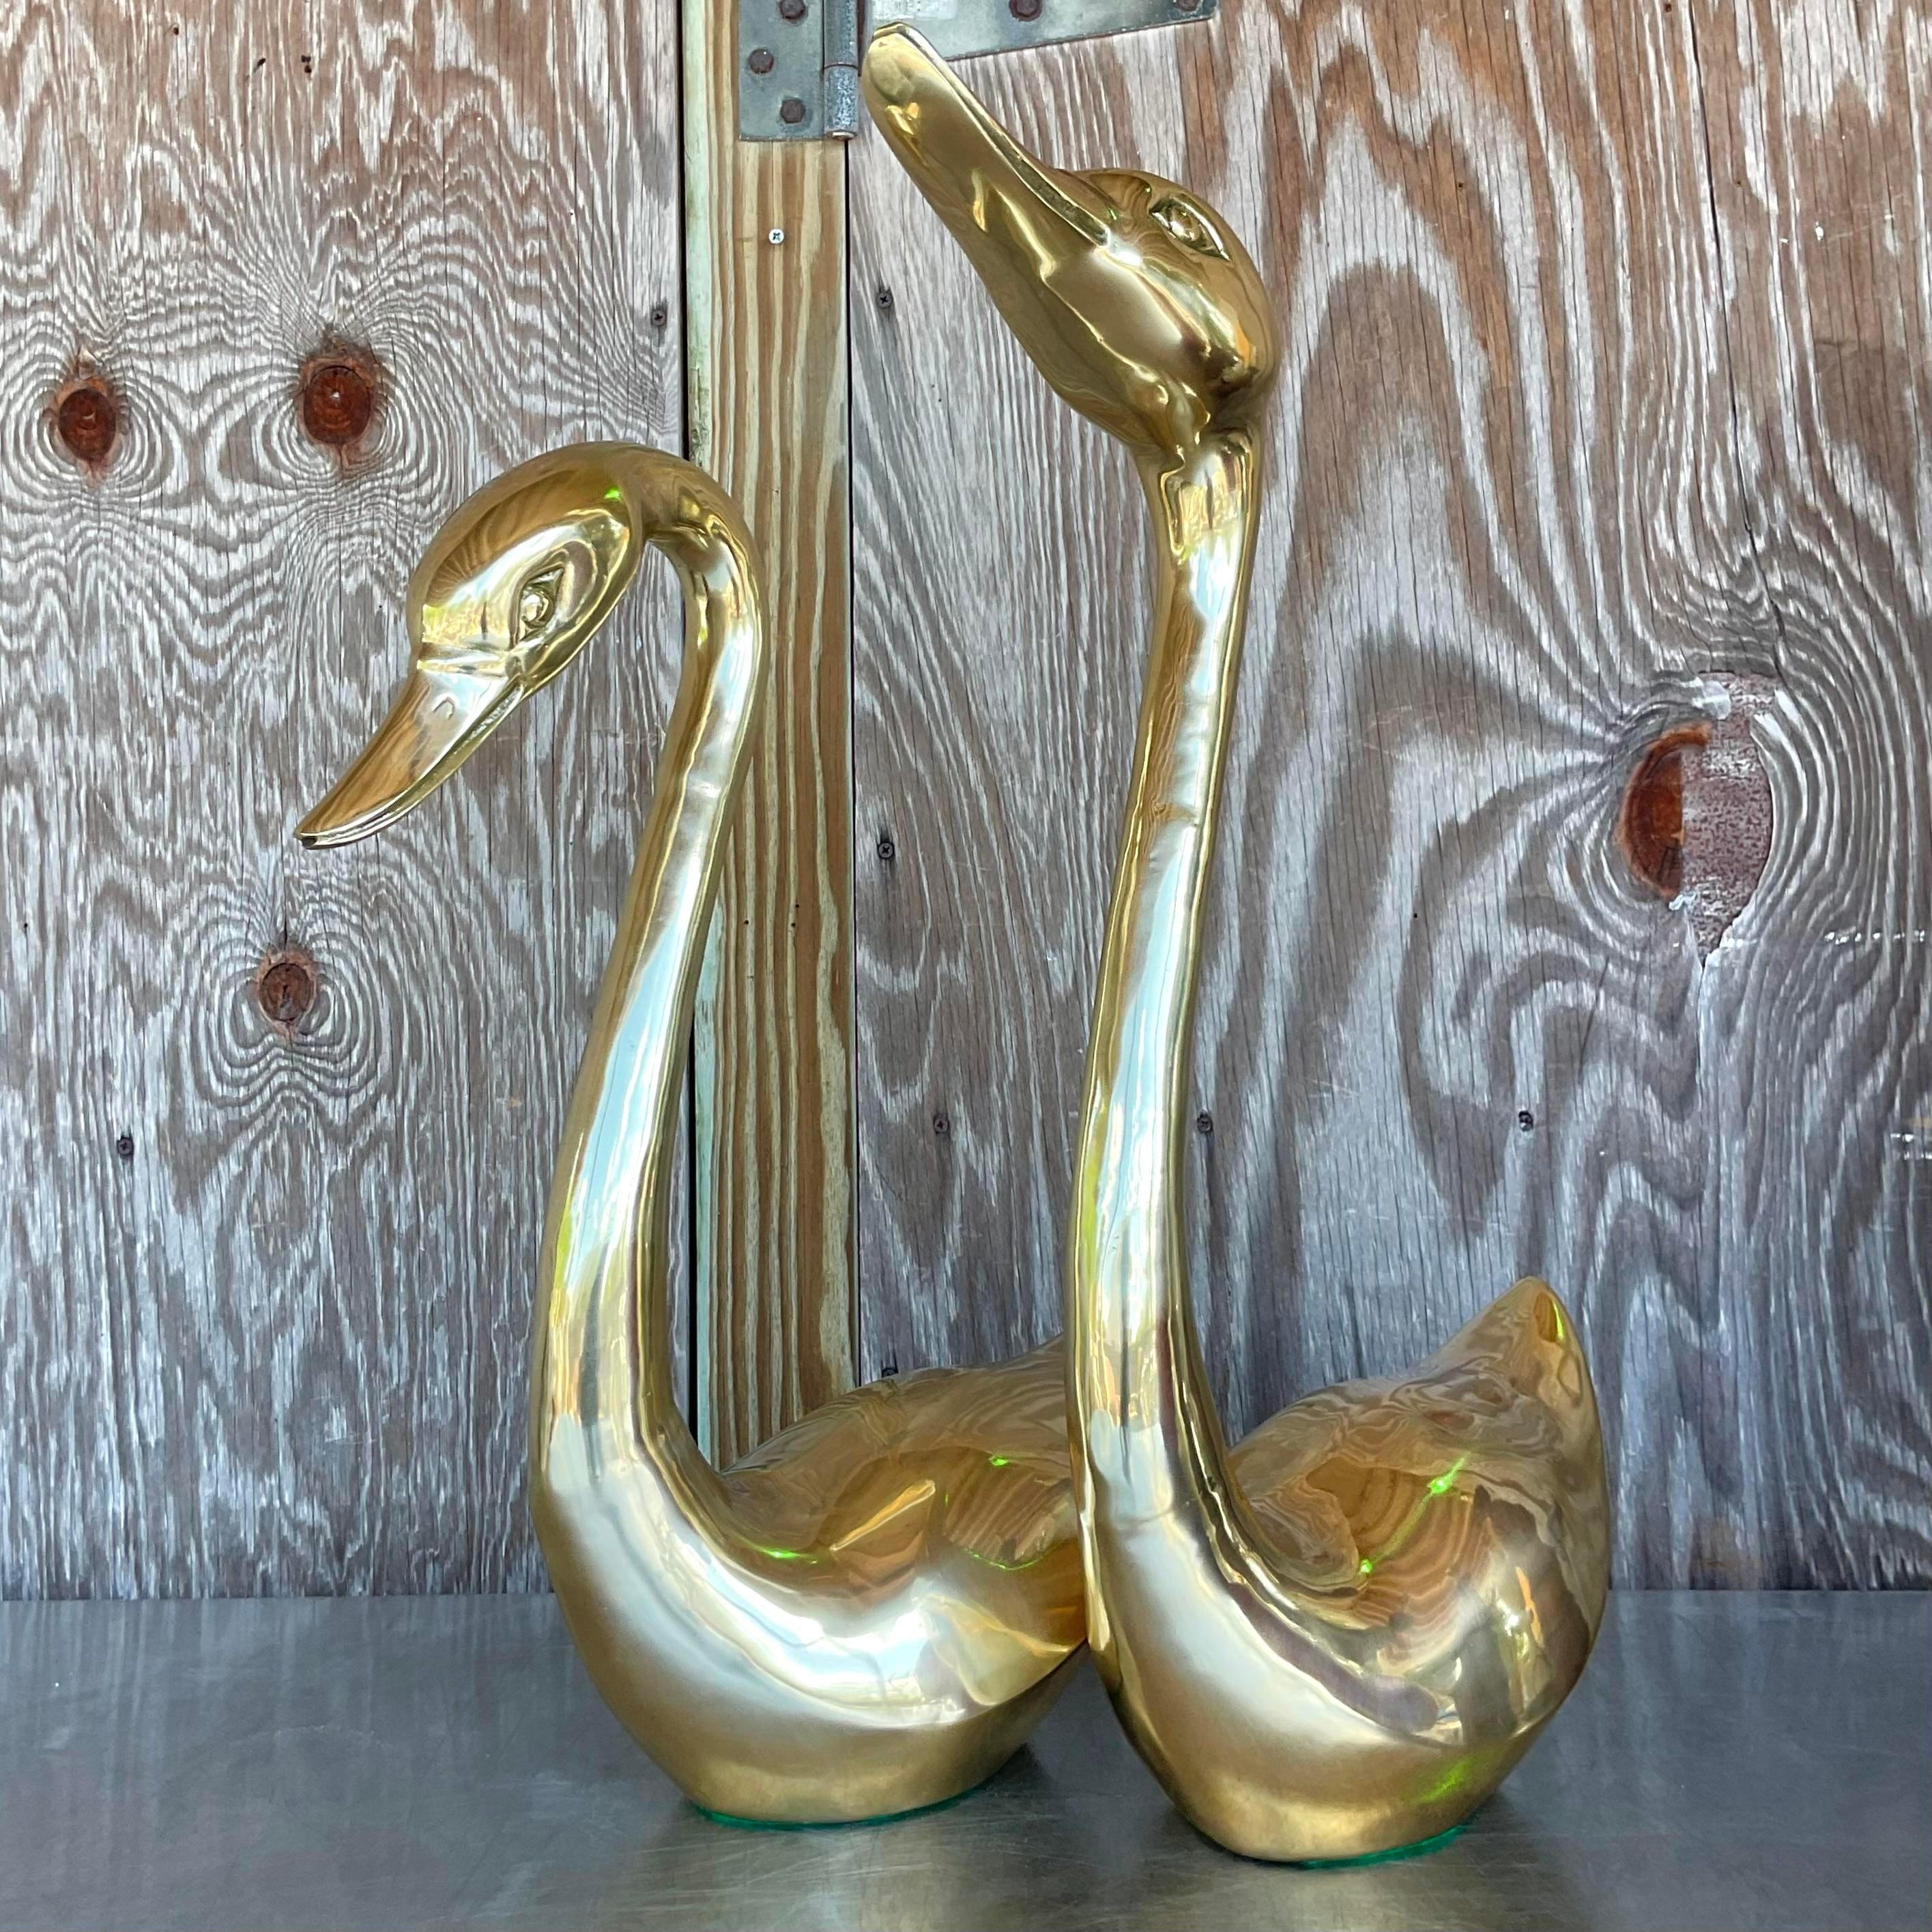 20th Century Vintage Regency Solid Brass Ducks - a Pair For Sale